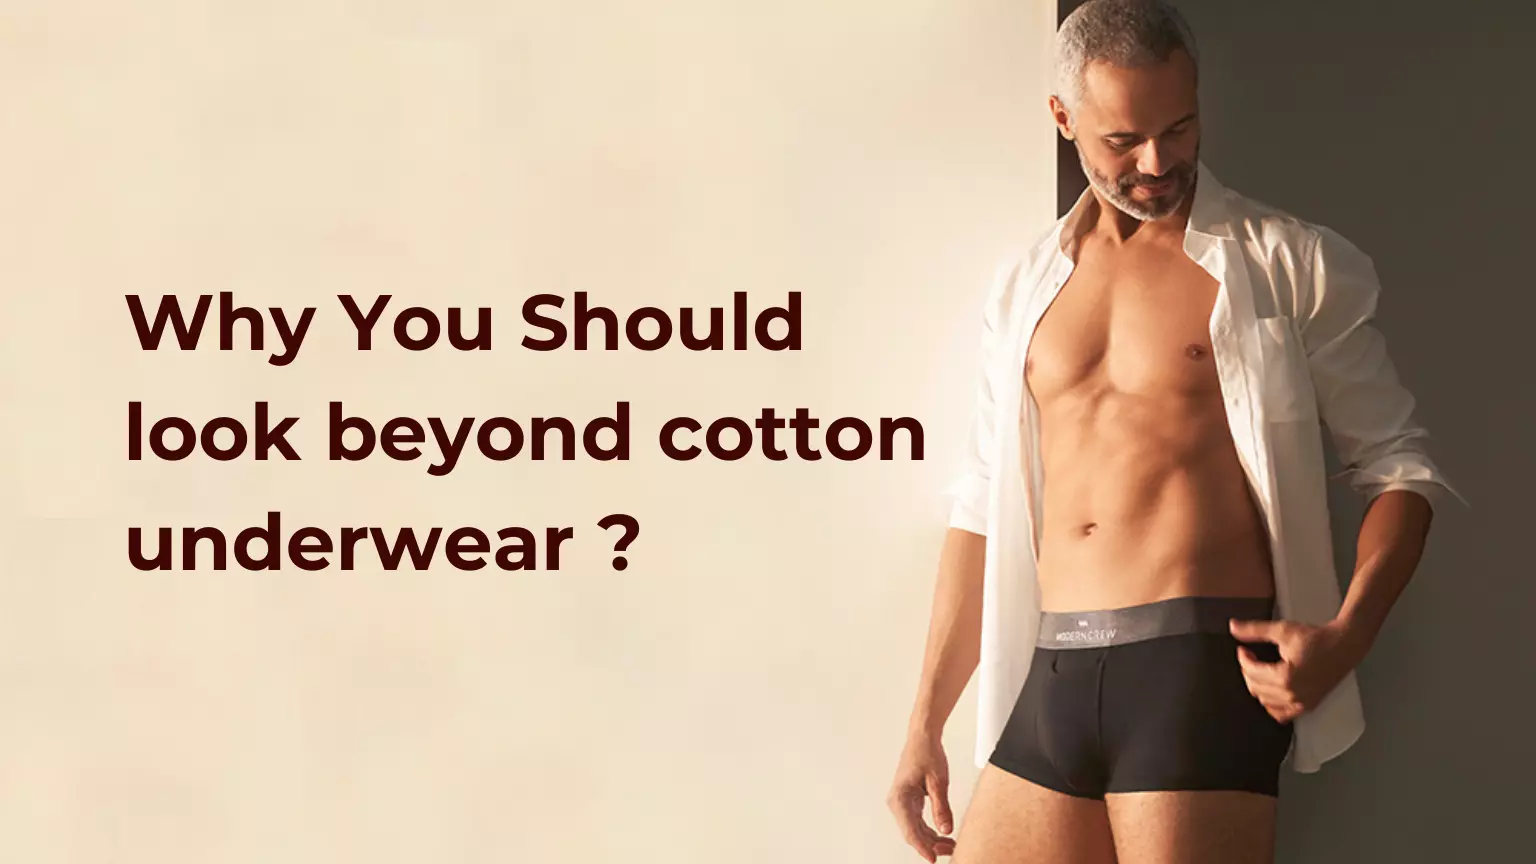 Why Should You Look Beyond Your Cotton Underwear?